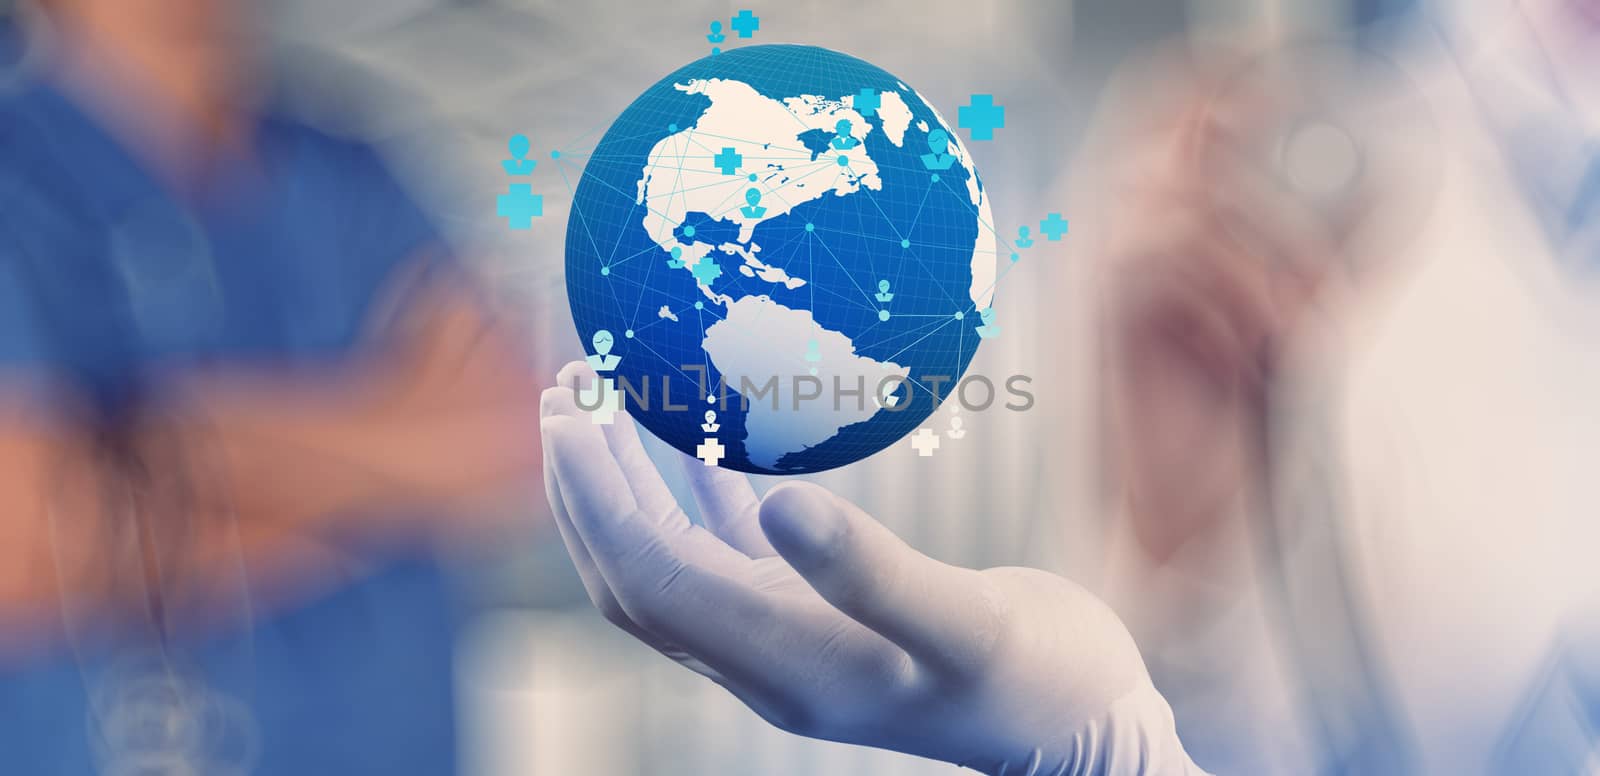 Medical Doctor holding a world globe in her hands as medical network concept 